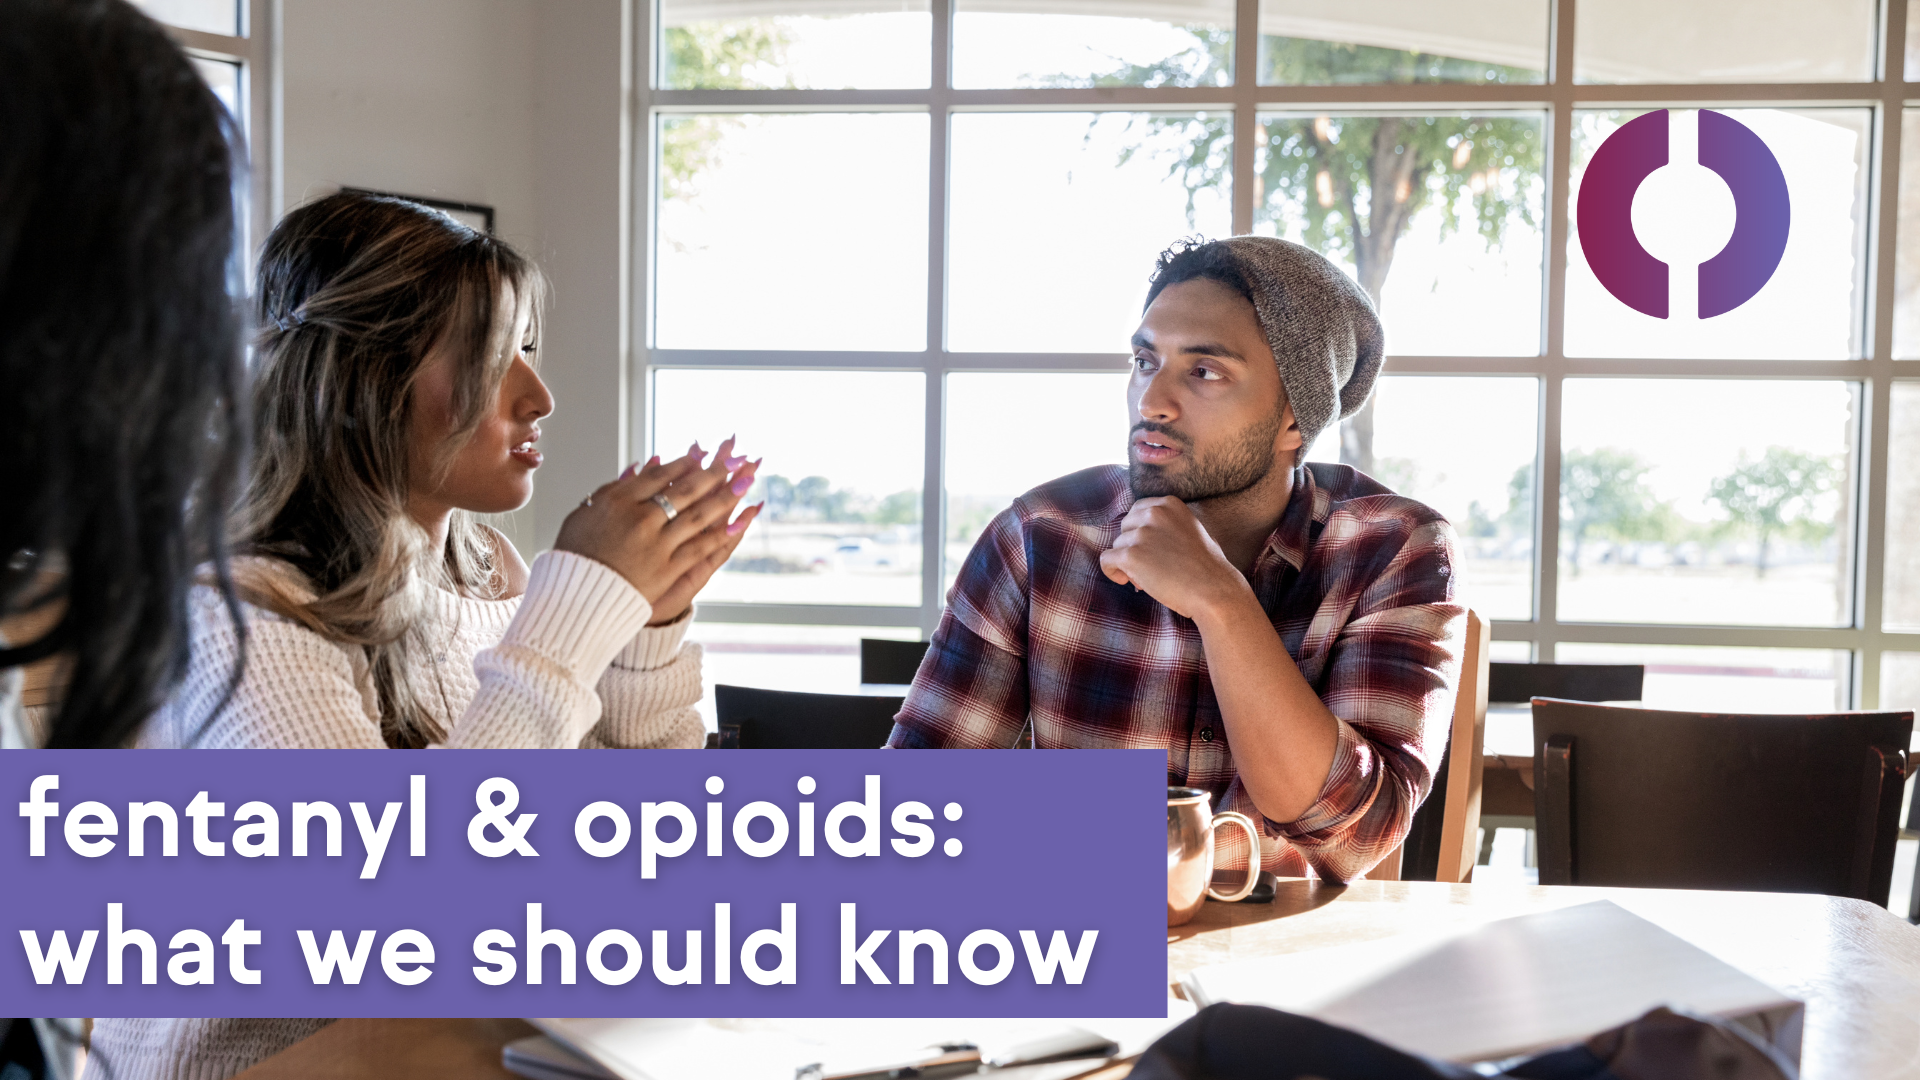 Three people, one man and two women, are sitting inside a home having a serious conversation. There is an allcove logo mark on the top right corner, and text on the bottom left corner which reads "fentanyl & opioids: what we should know."